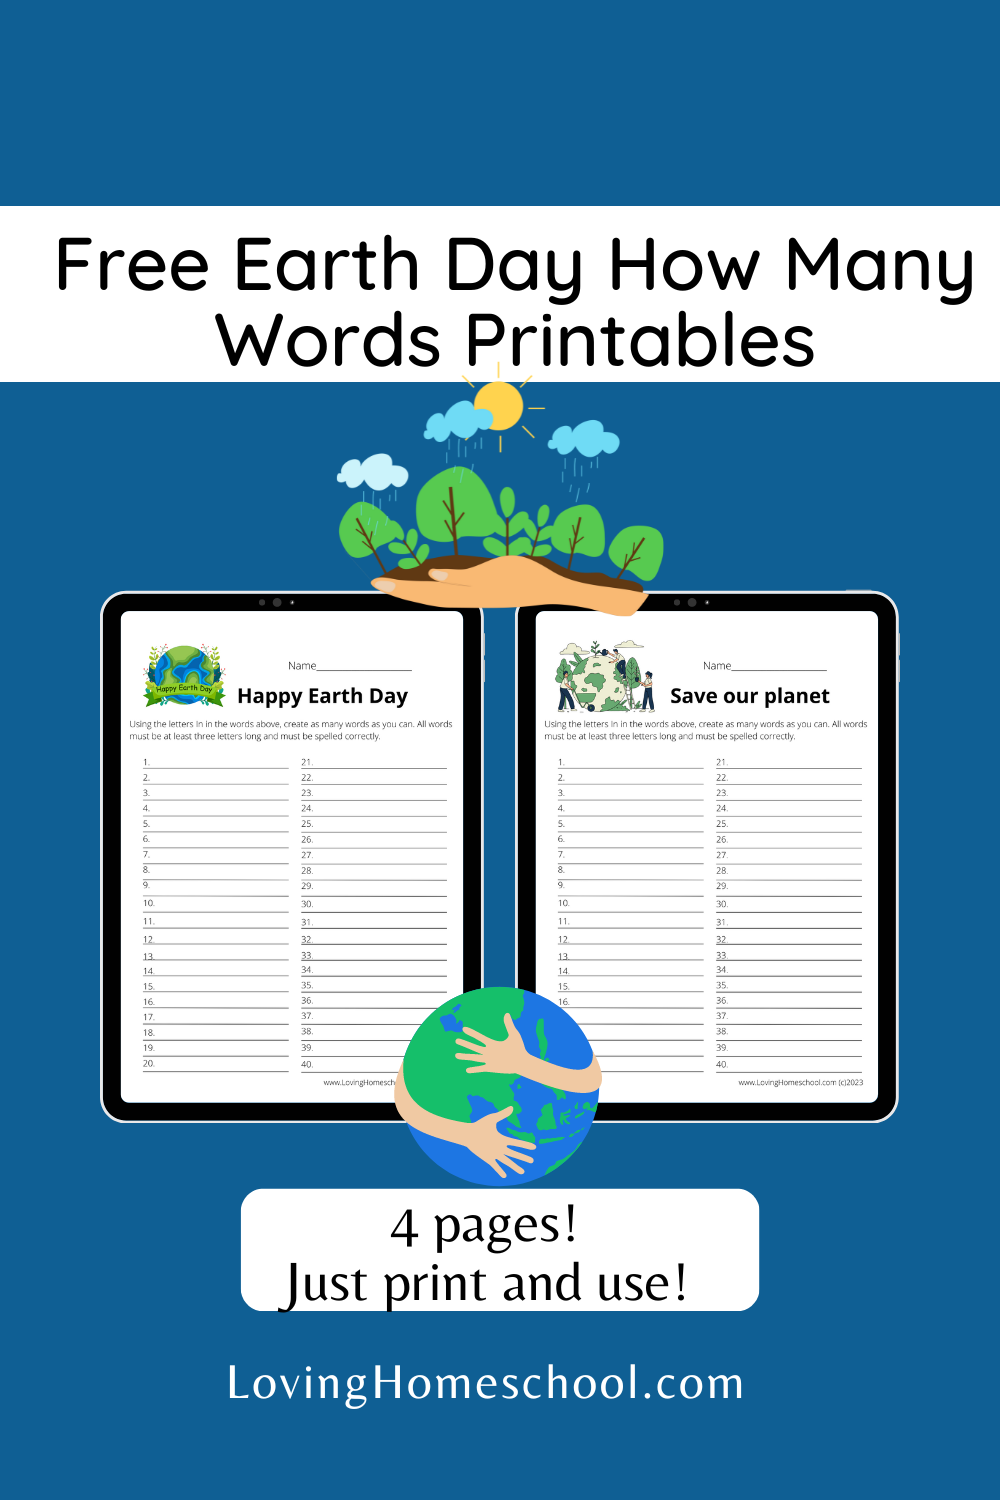 Free Earth Day How Many Words Printables Pinterest Pin